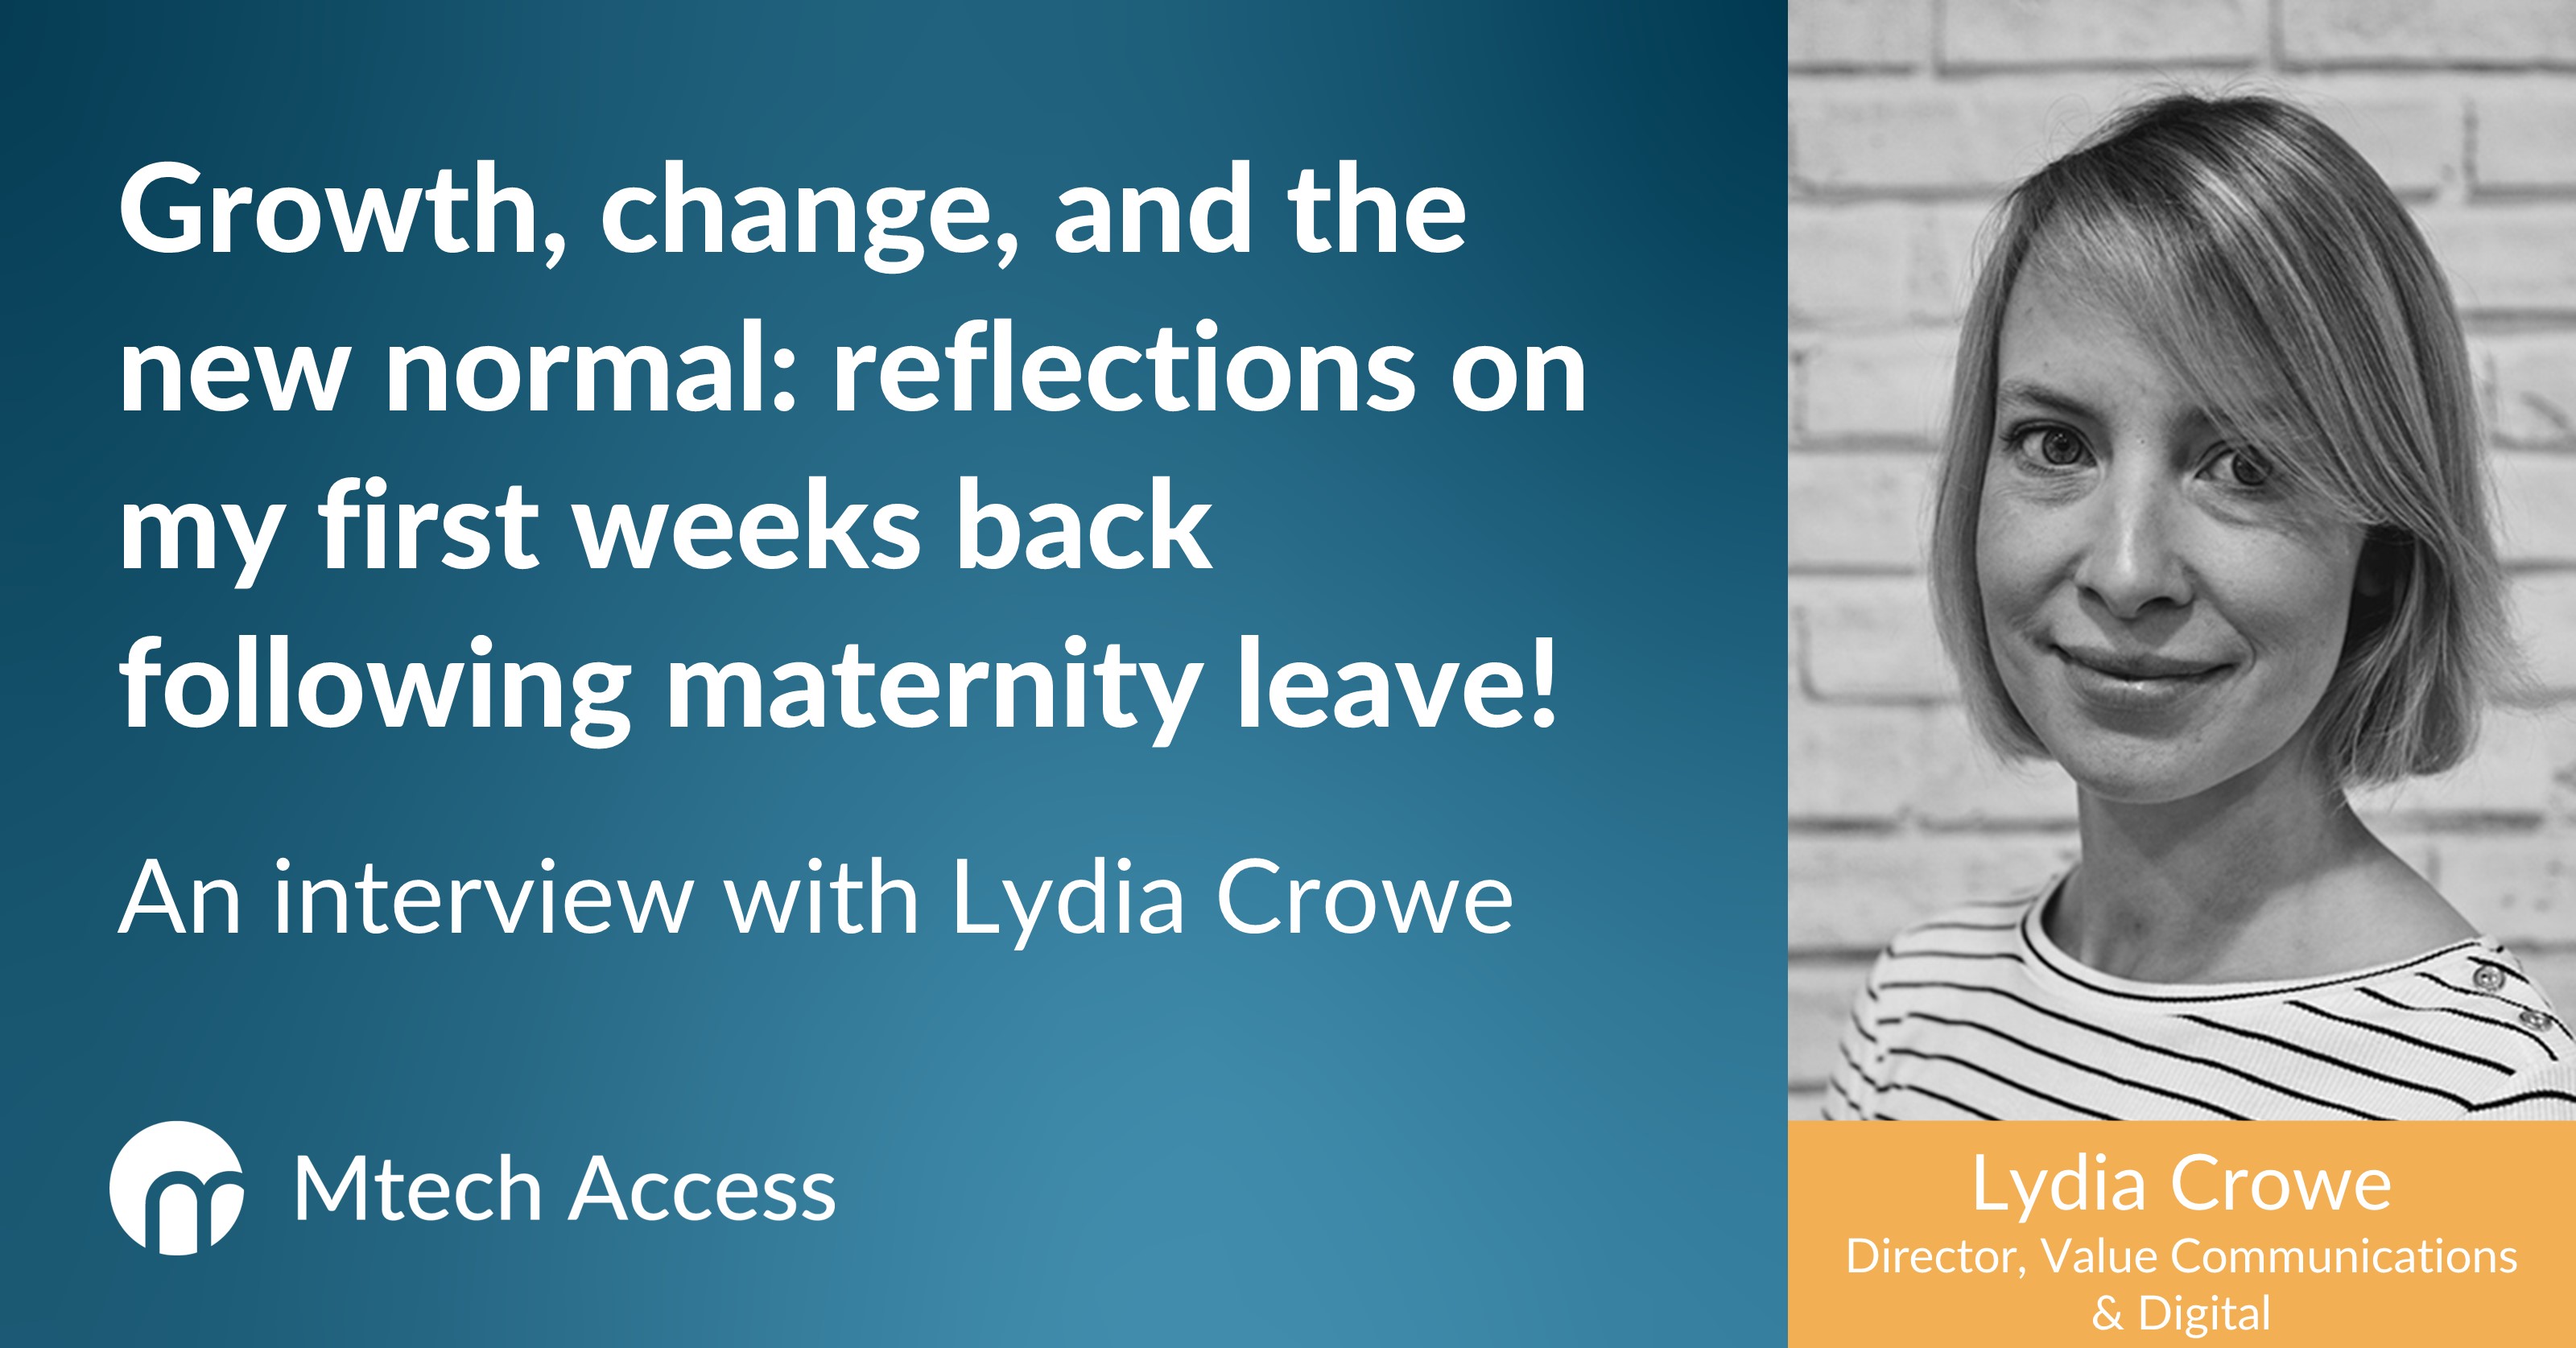 Growth, change, and the new normal: reflections on my first weeks back following maternity leave! An interview with Lydia Crowe, irector, Value Communications and Digital